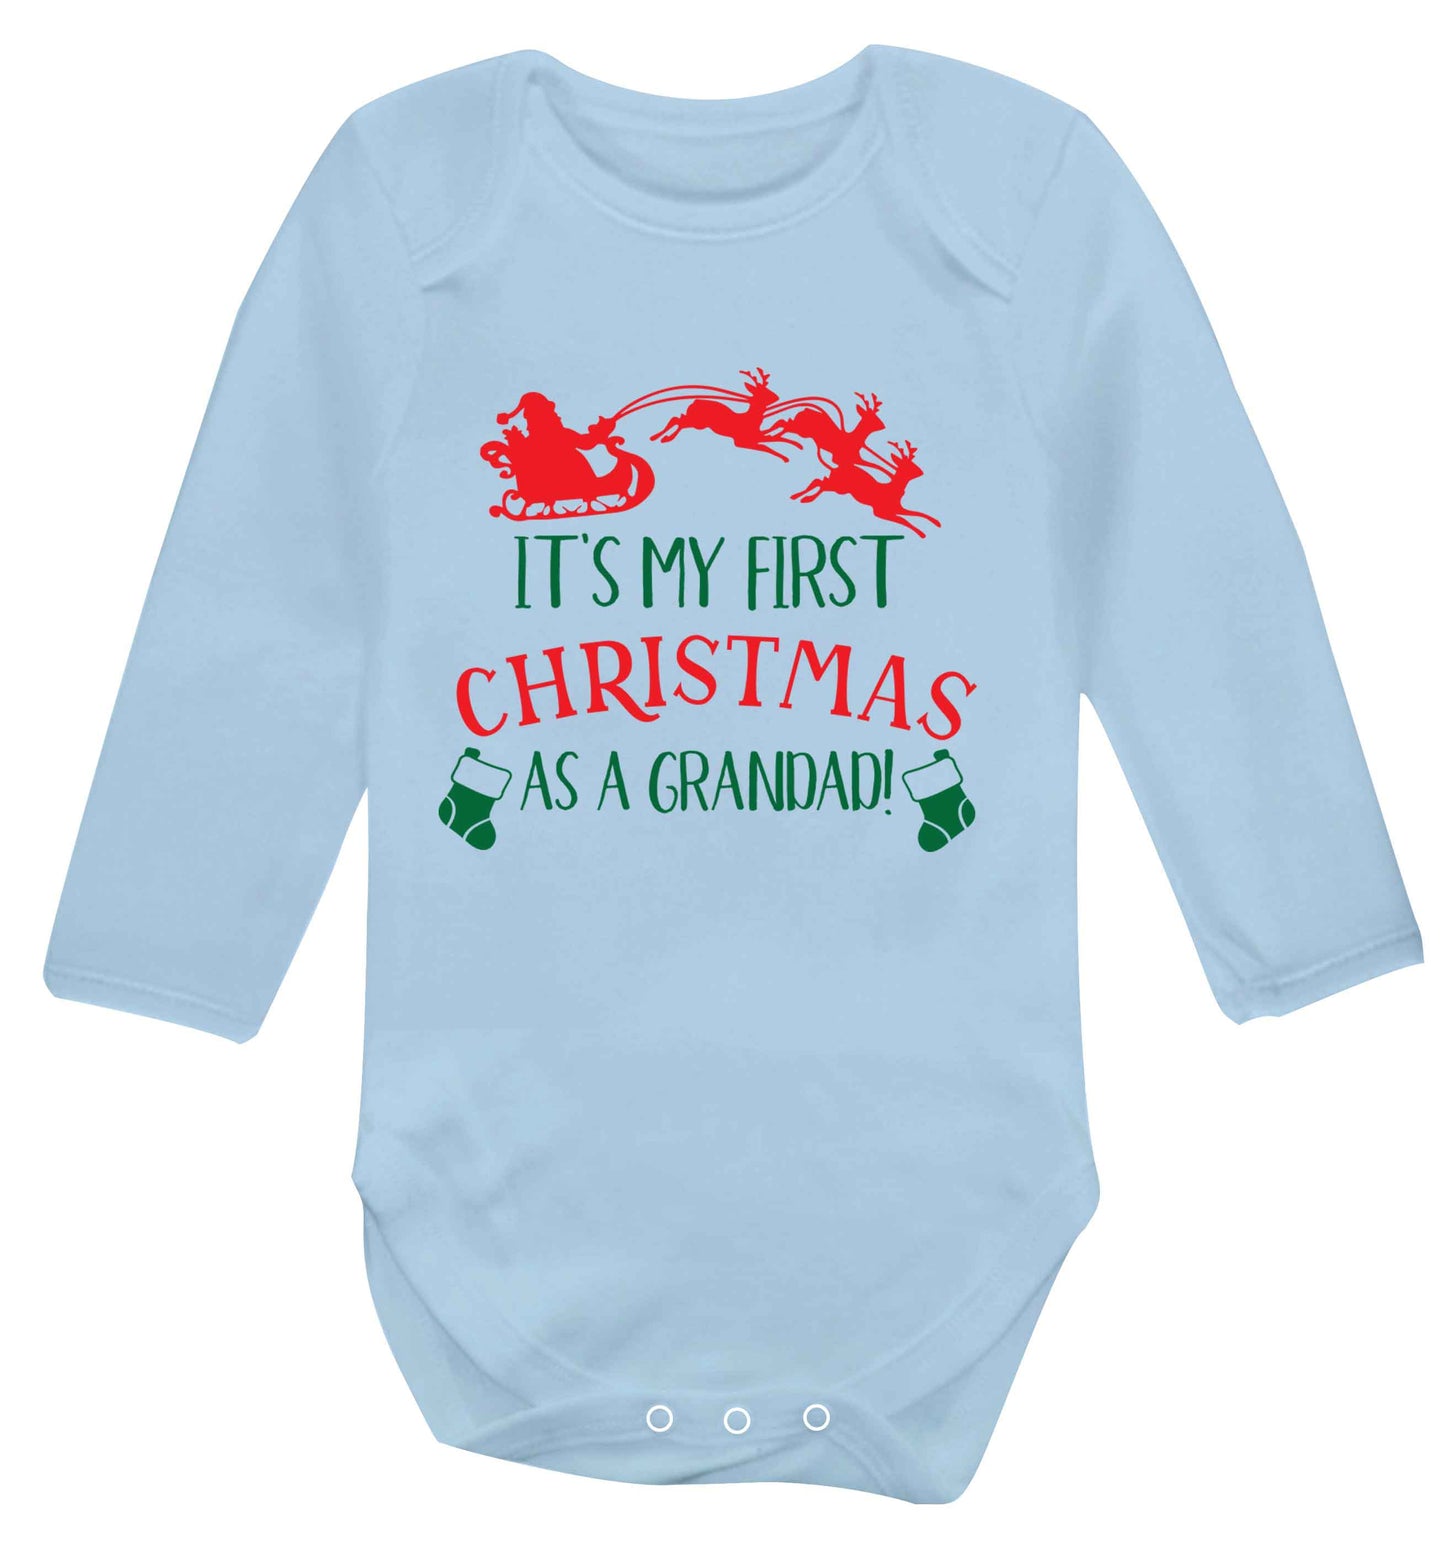 It's my first Christmas as a grandad! Baby Vest long sleeved pale blue 6-12 months